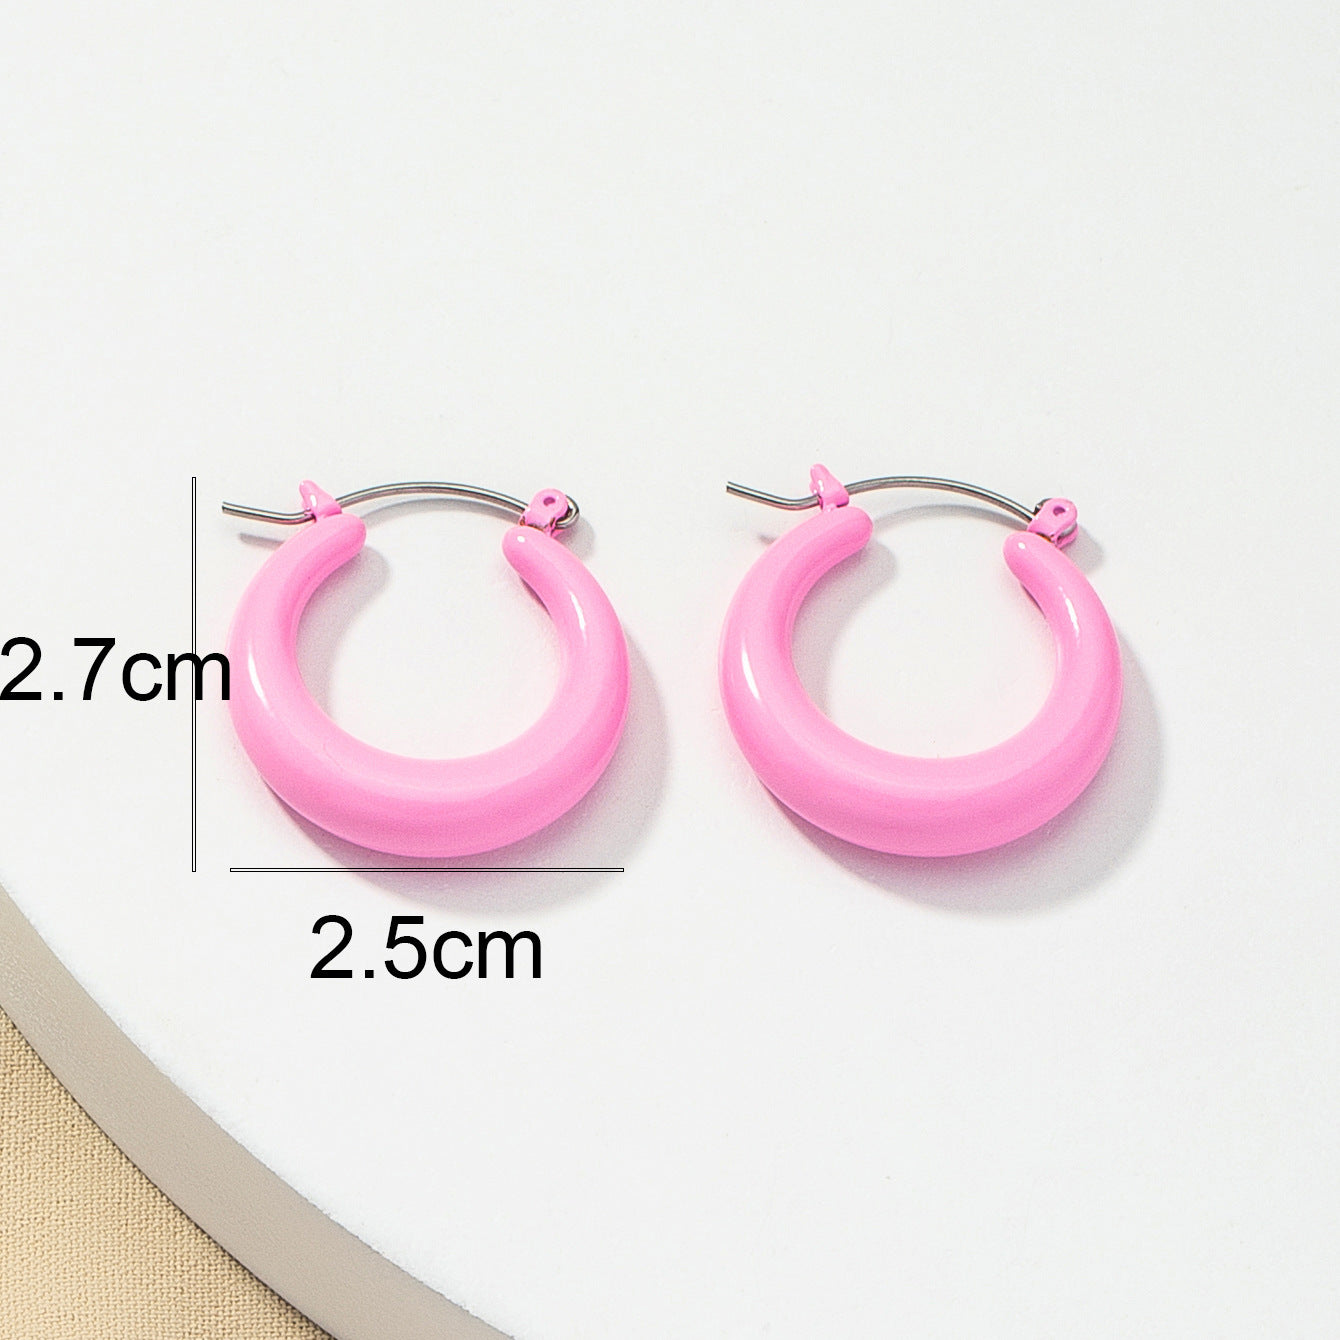 Candy Color Fashion Earrings with Lacquered Finish - Wholesale Pair